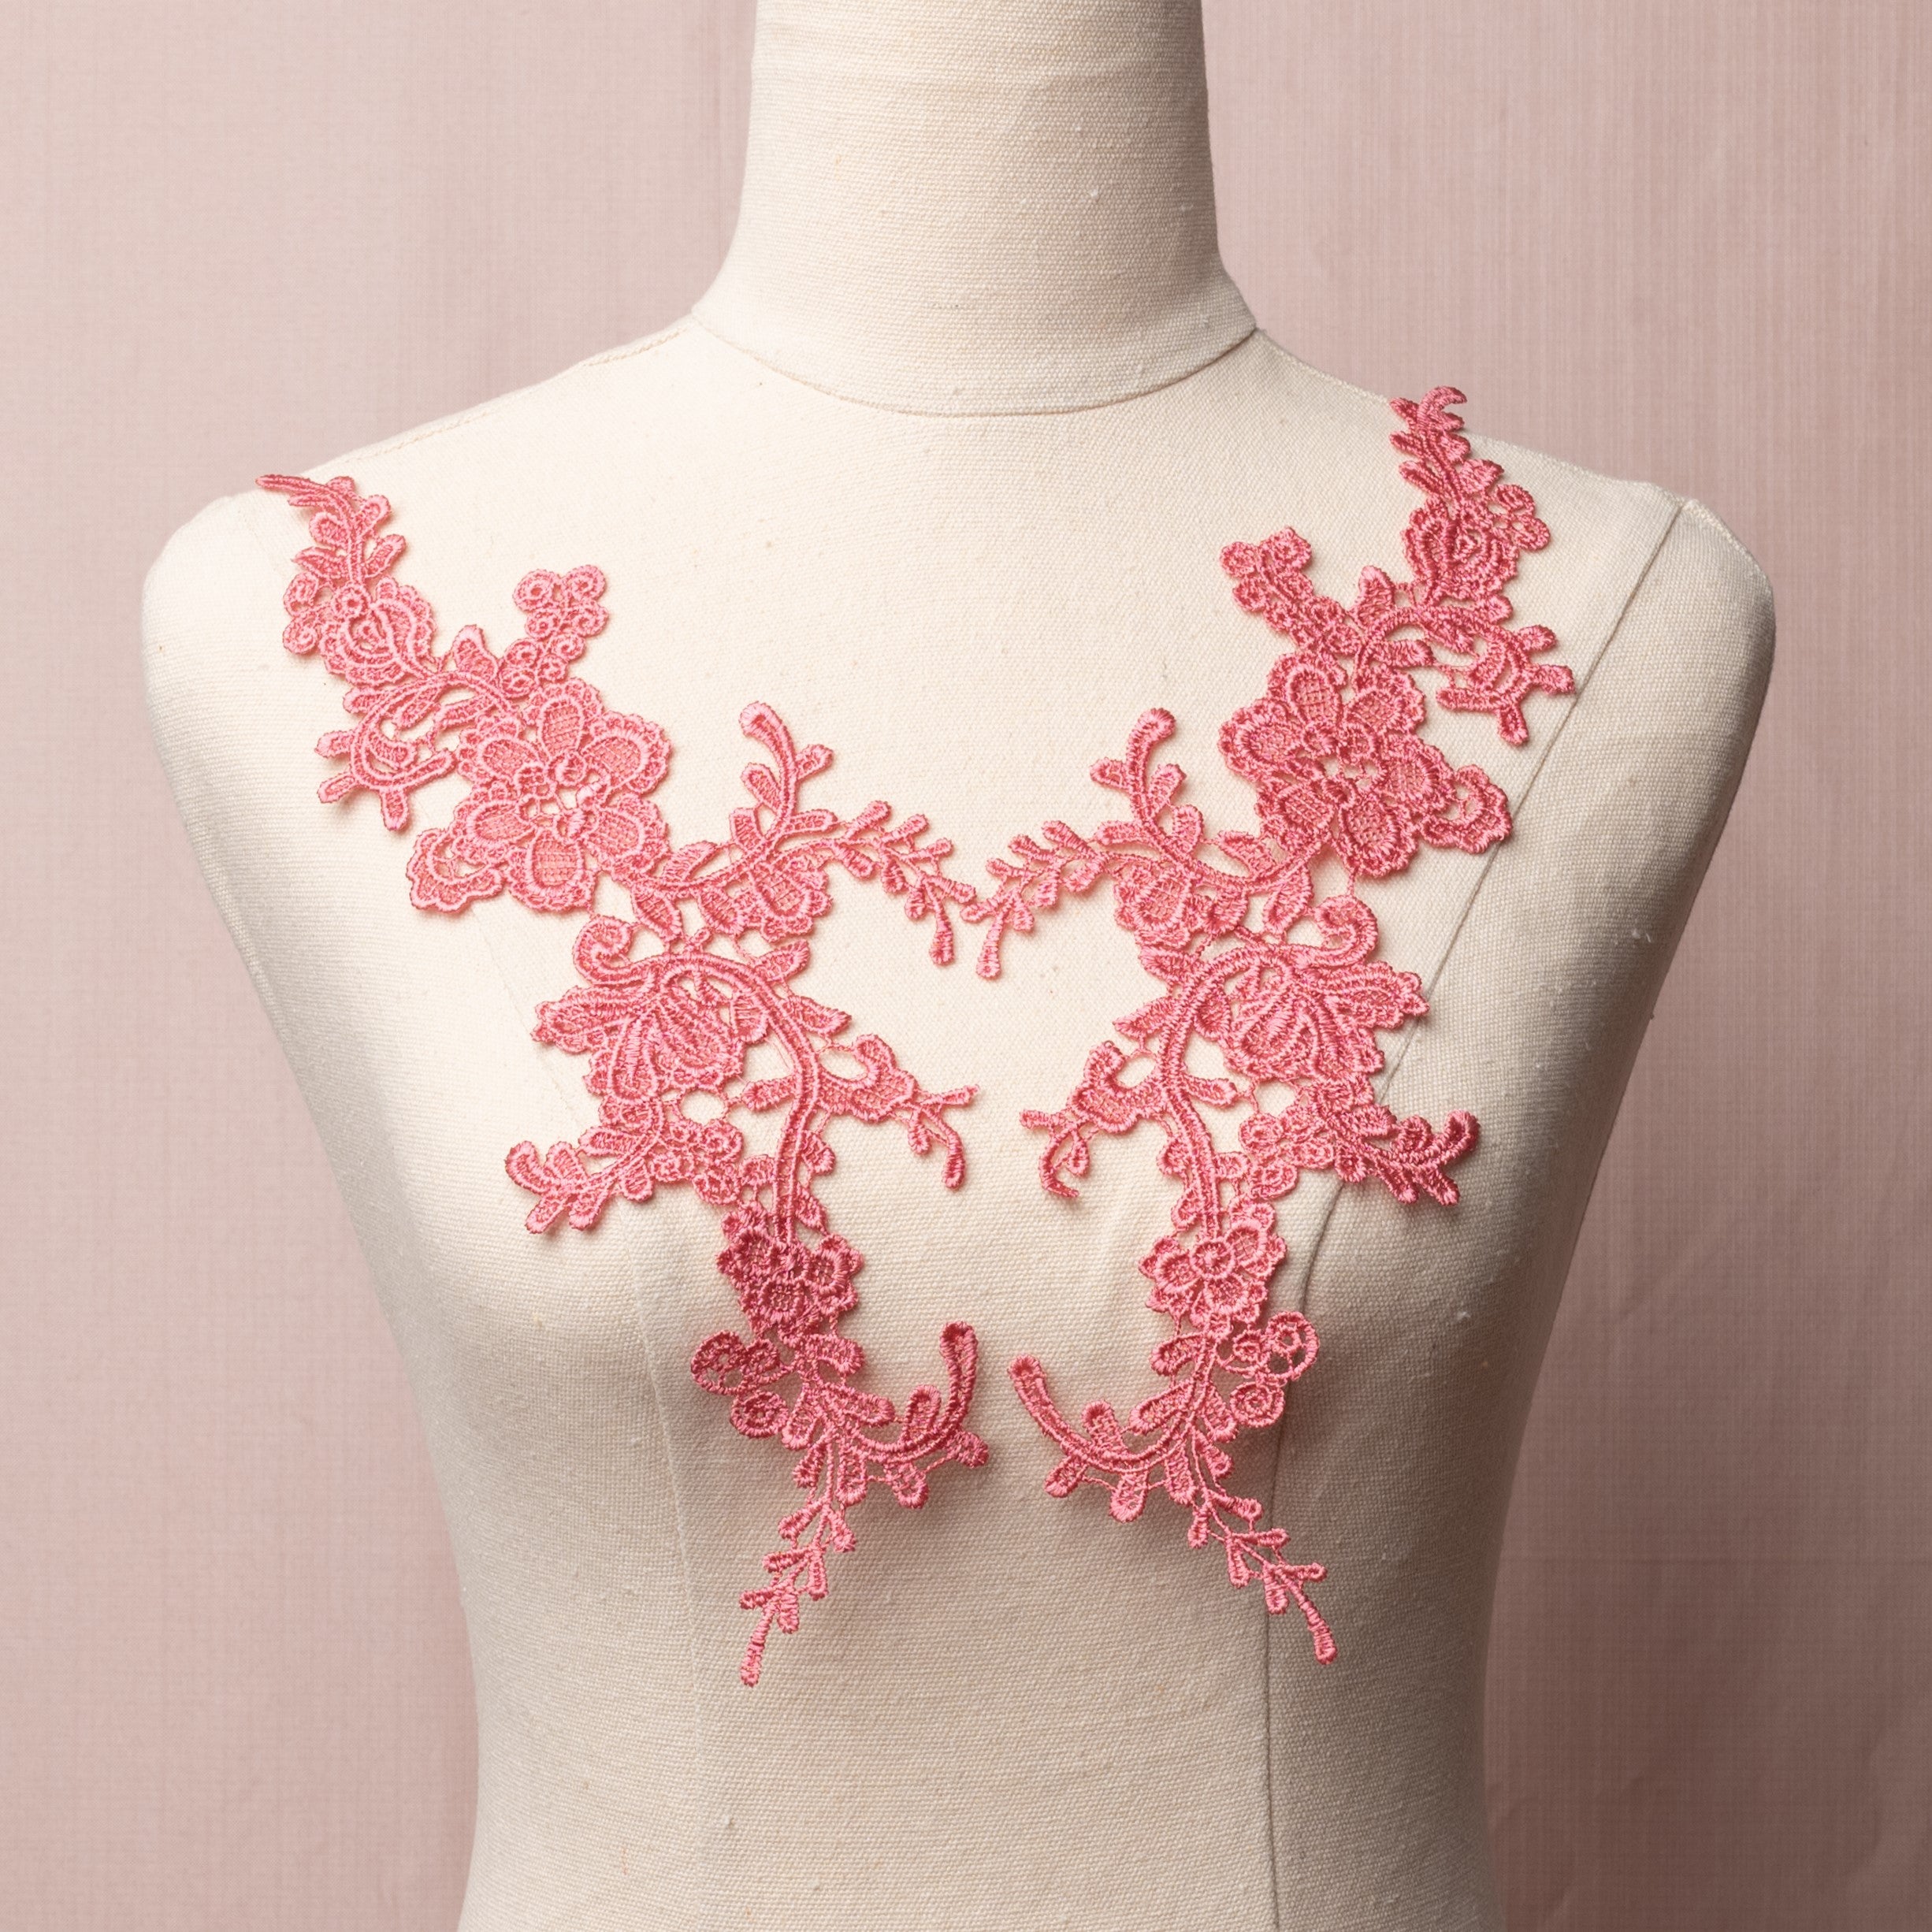 Watermelon pink lace applique pair embroidered with a flower pattern and displayed on a mannequin.